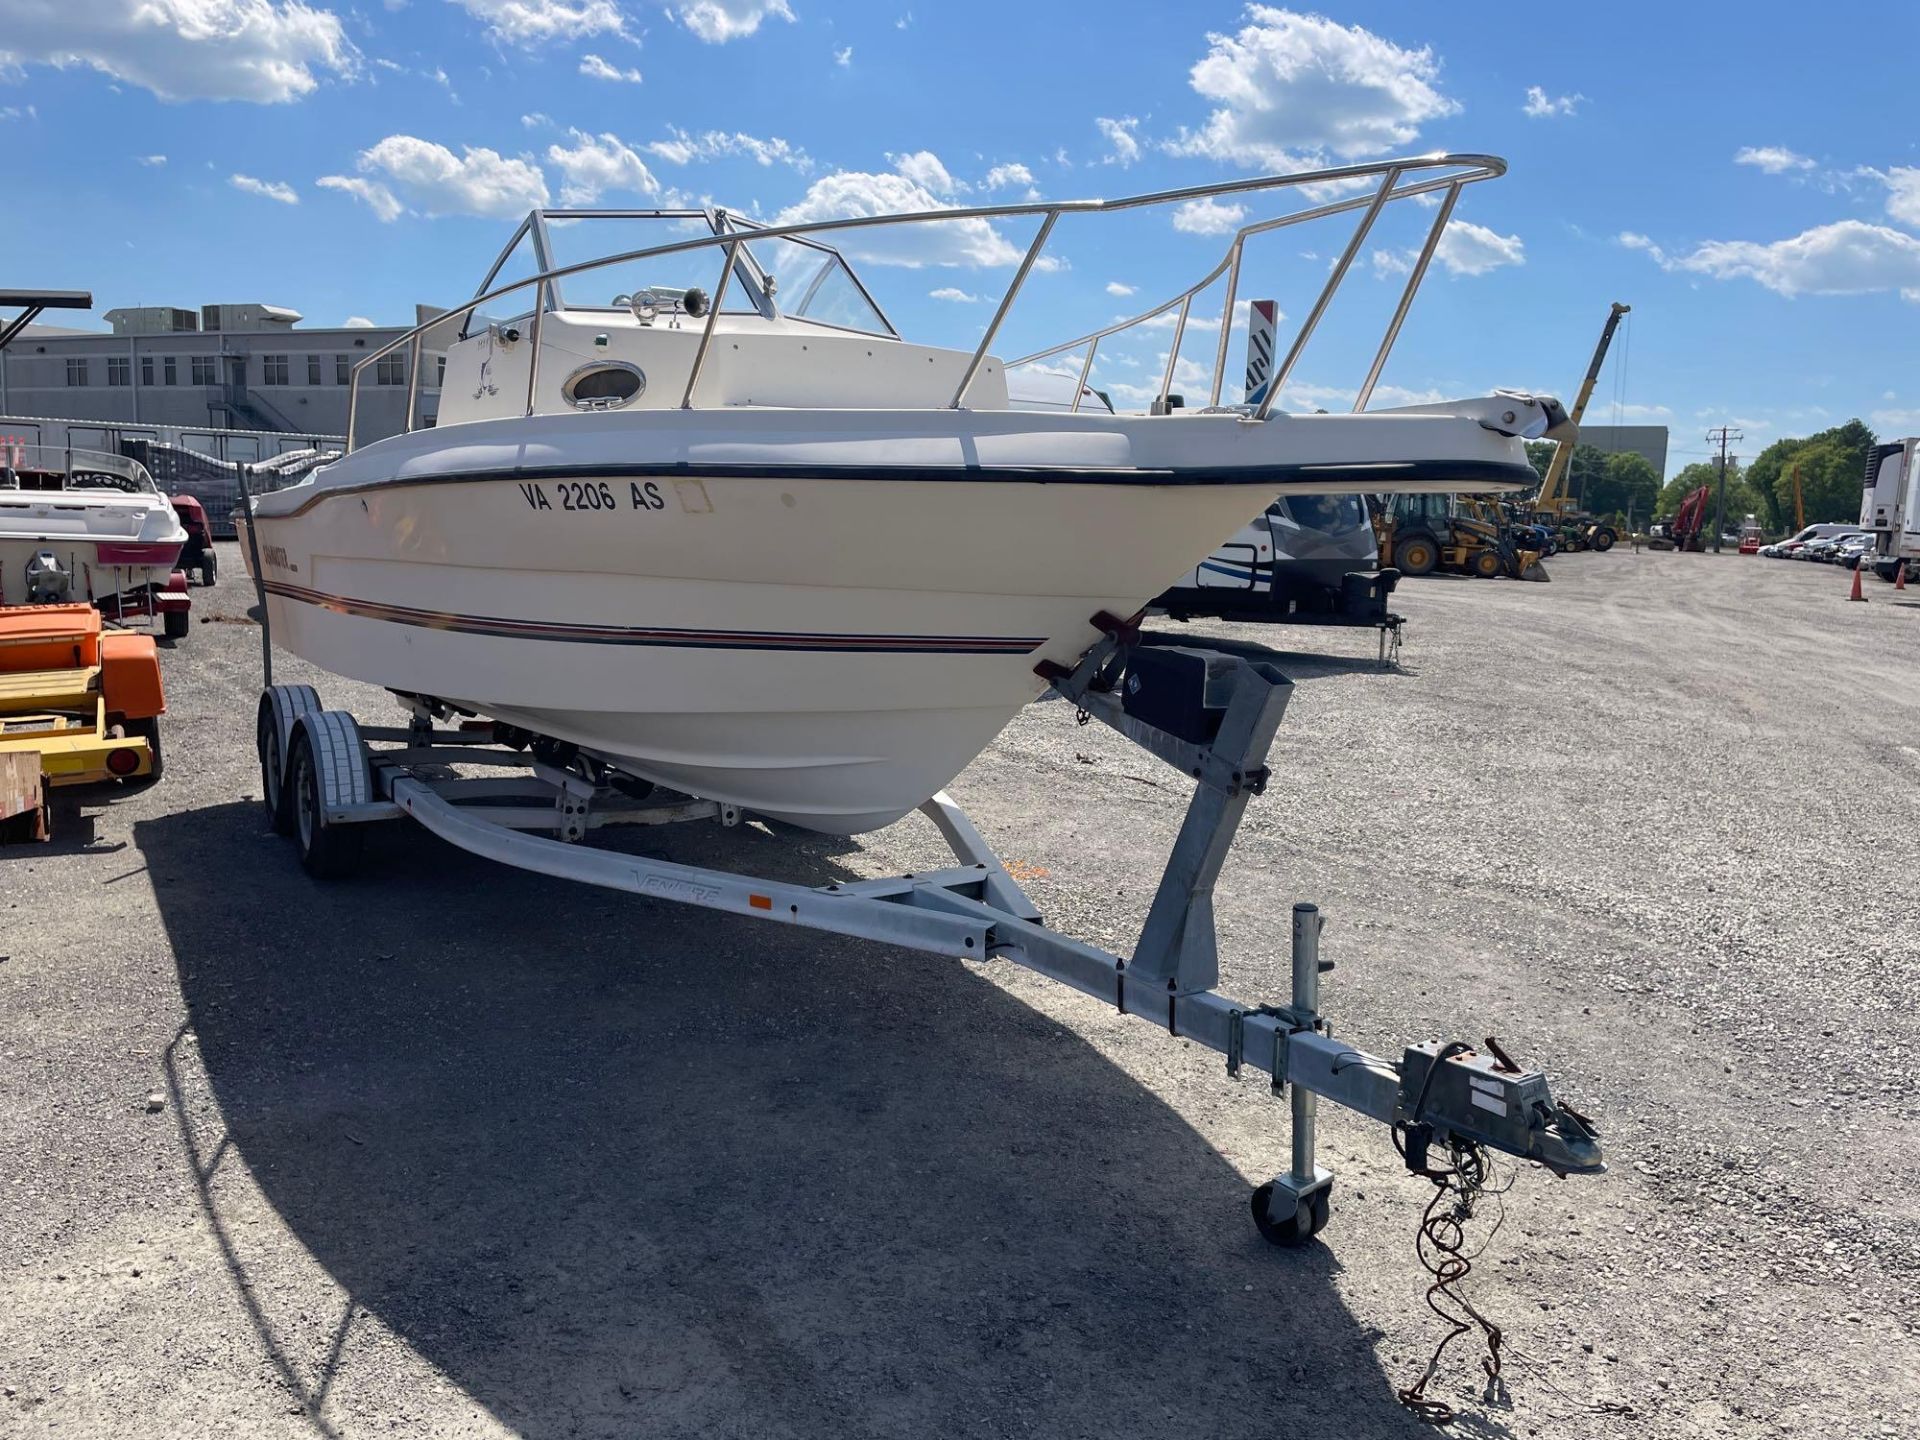 1997 Sea Master 24.4' Boat With Venture Trailer - Image 4 of 20